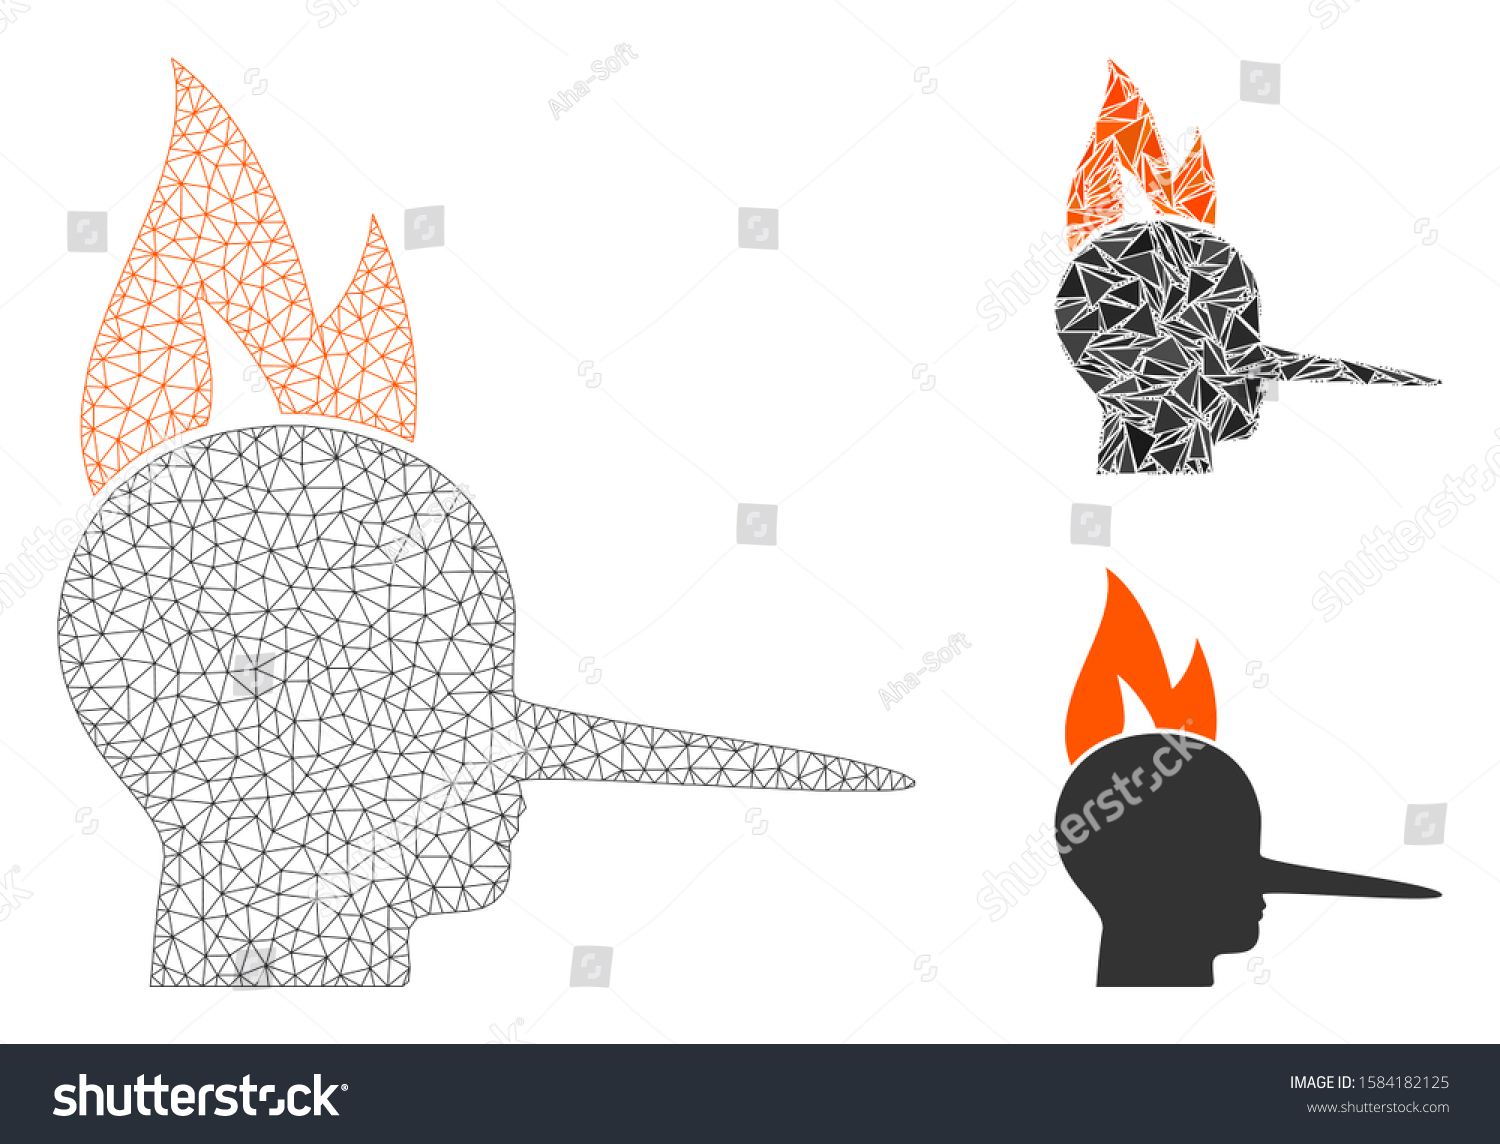 SVG of Mesh fired liar model with triangle mosaic icon. Wire frame polygonal mesh of fired liar. Vector collage of triangle parts in various sizes, and color shades. Abstract flat mesh fired liar, svg